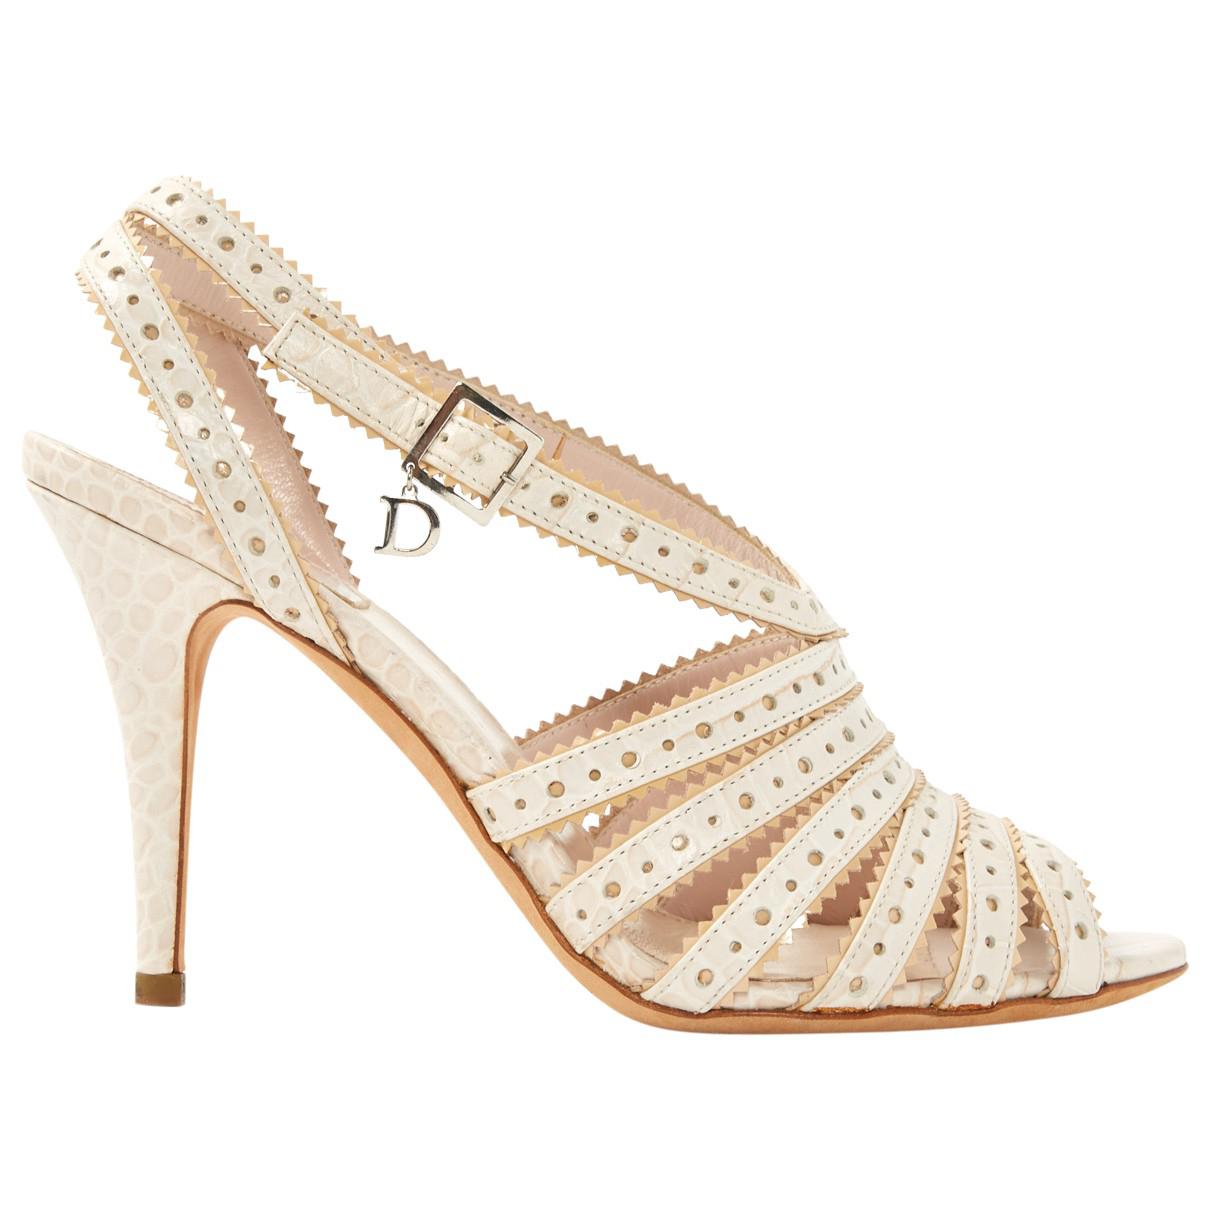 Lyst - Dior Pre-owned Leather Heels in White